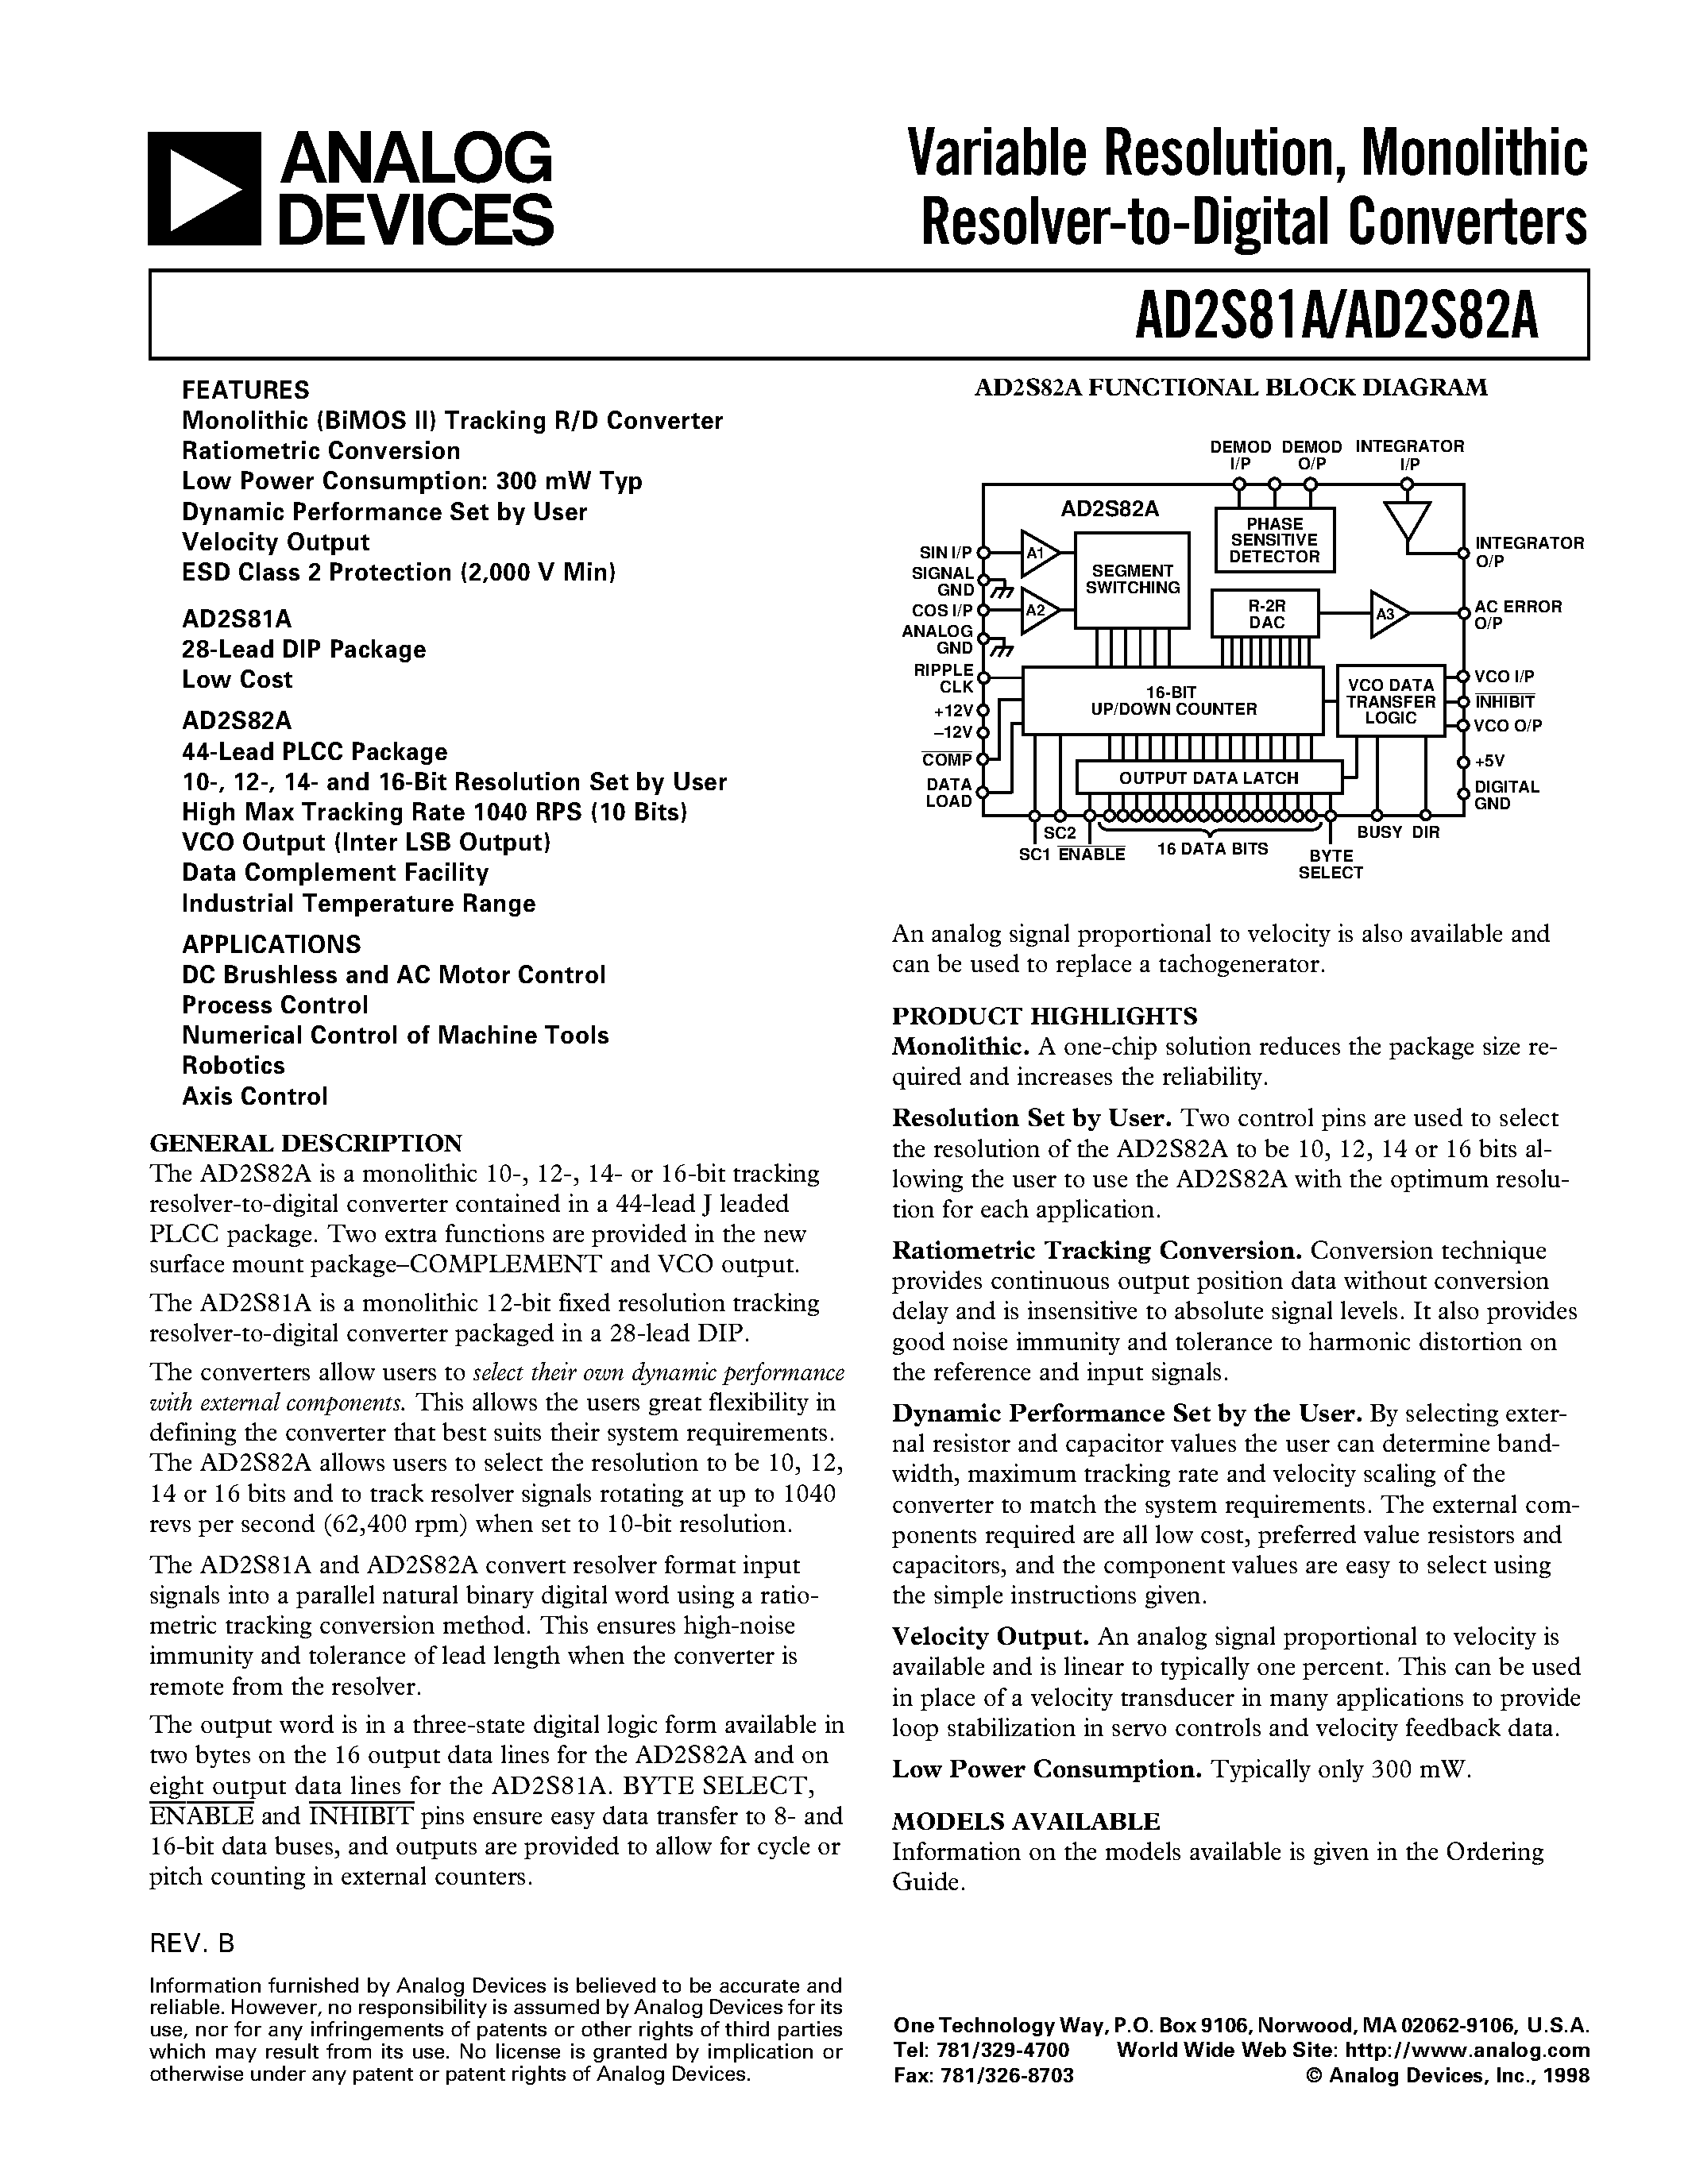 Datasheet AD2S82AKP - Variable Resolution/ Monolithic Resolver-to-Digital Converters page 1